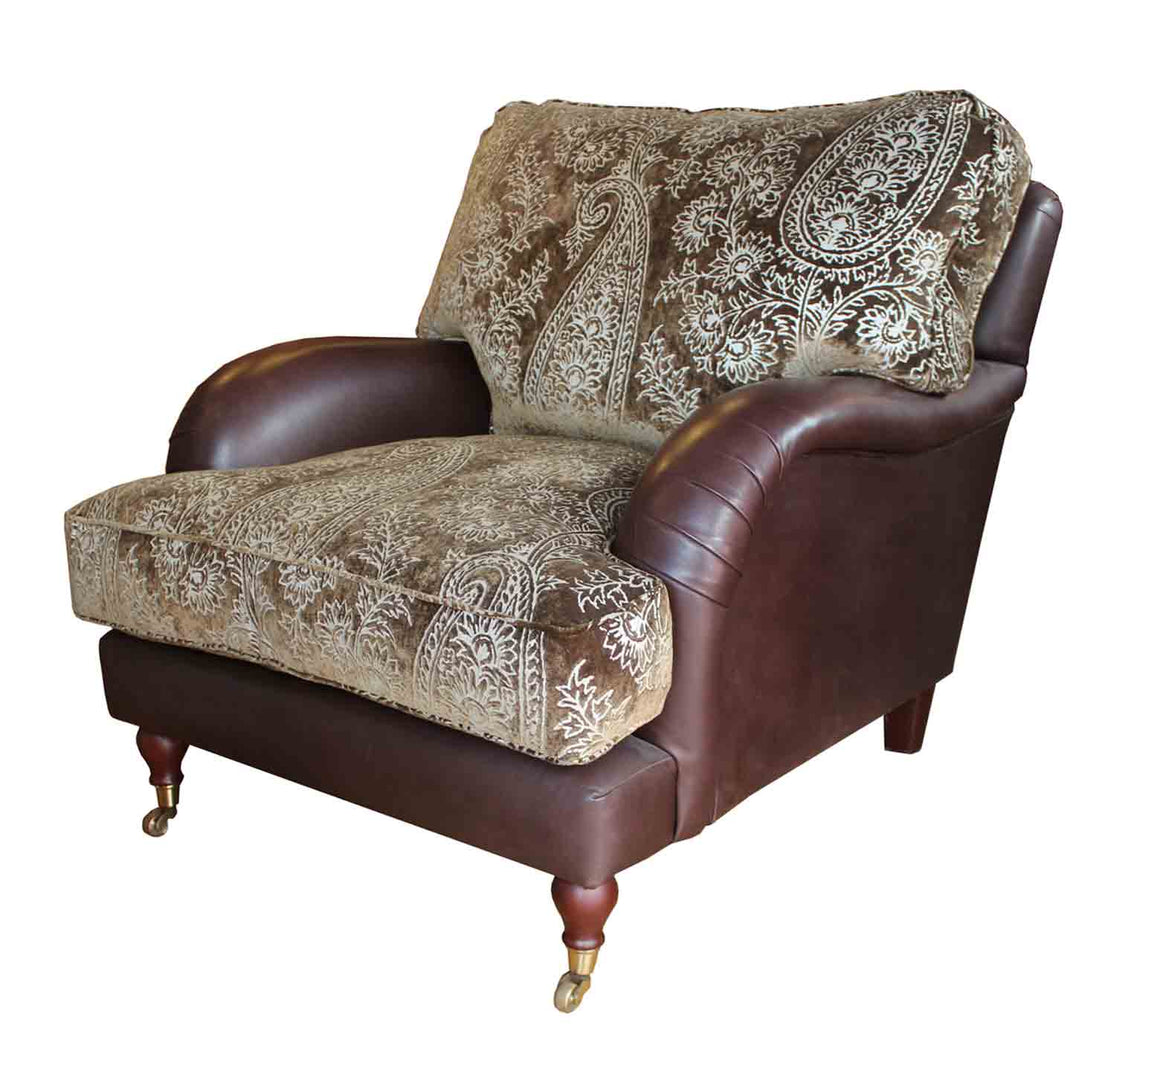 Burnham Cushion Back Chair in Fabric and Leather